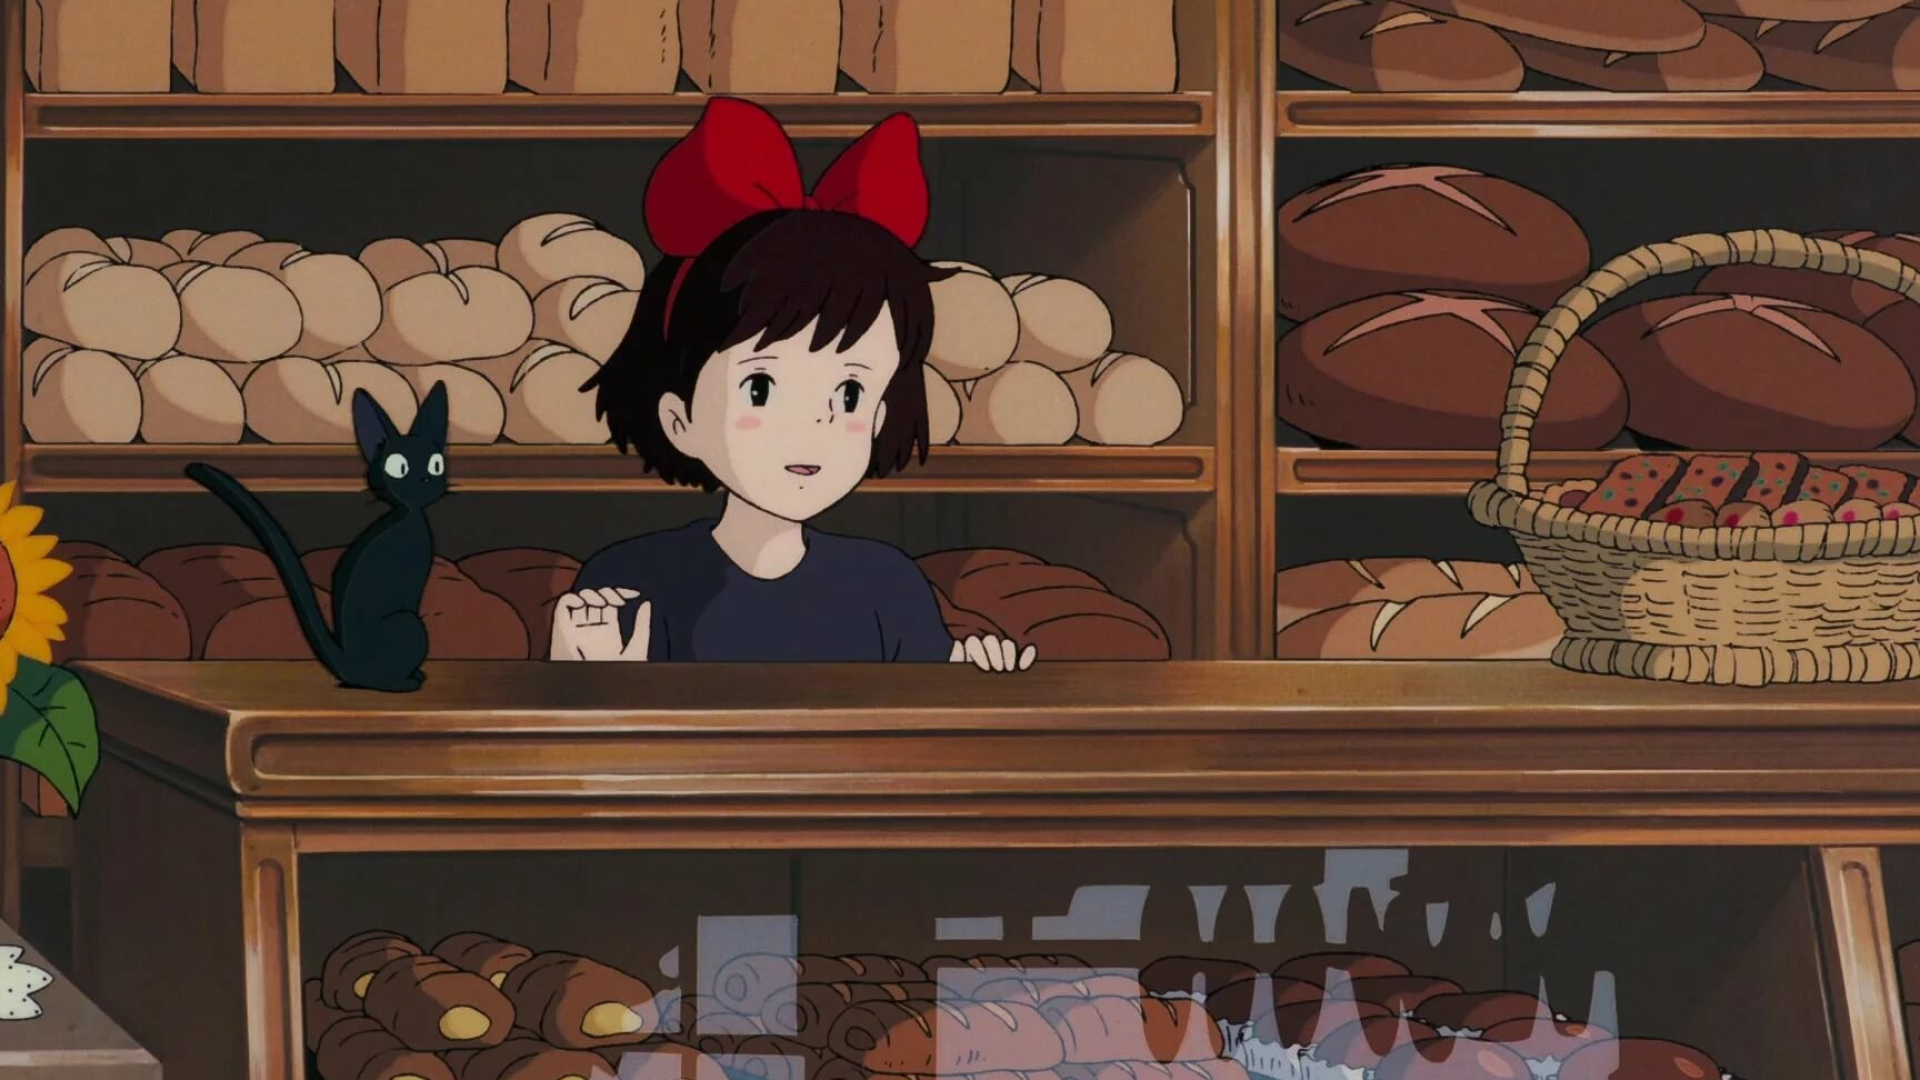 Kiki's Delivery Service: Entertainment Weekly rated it as Video of the Year on September 4, 1998. 1920x1080 Full HD Wallpaper.